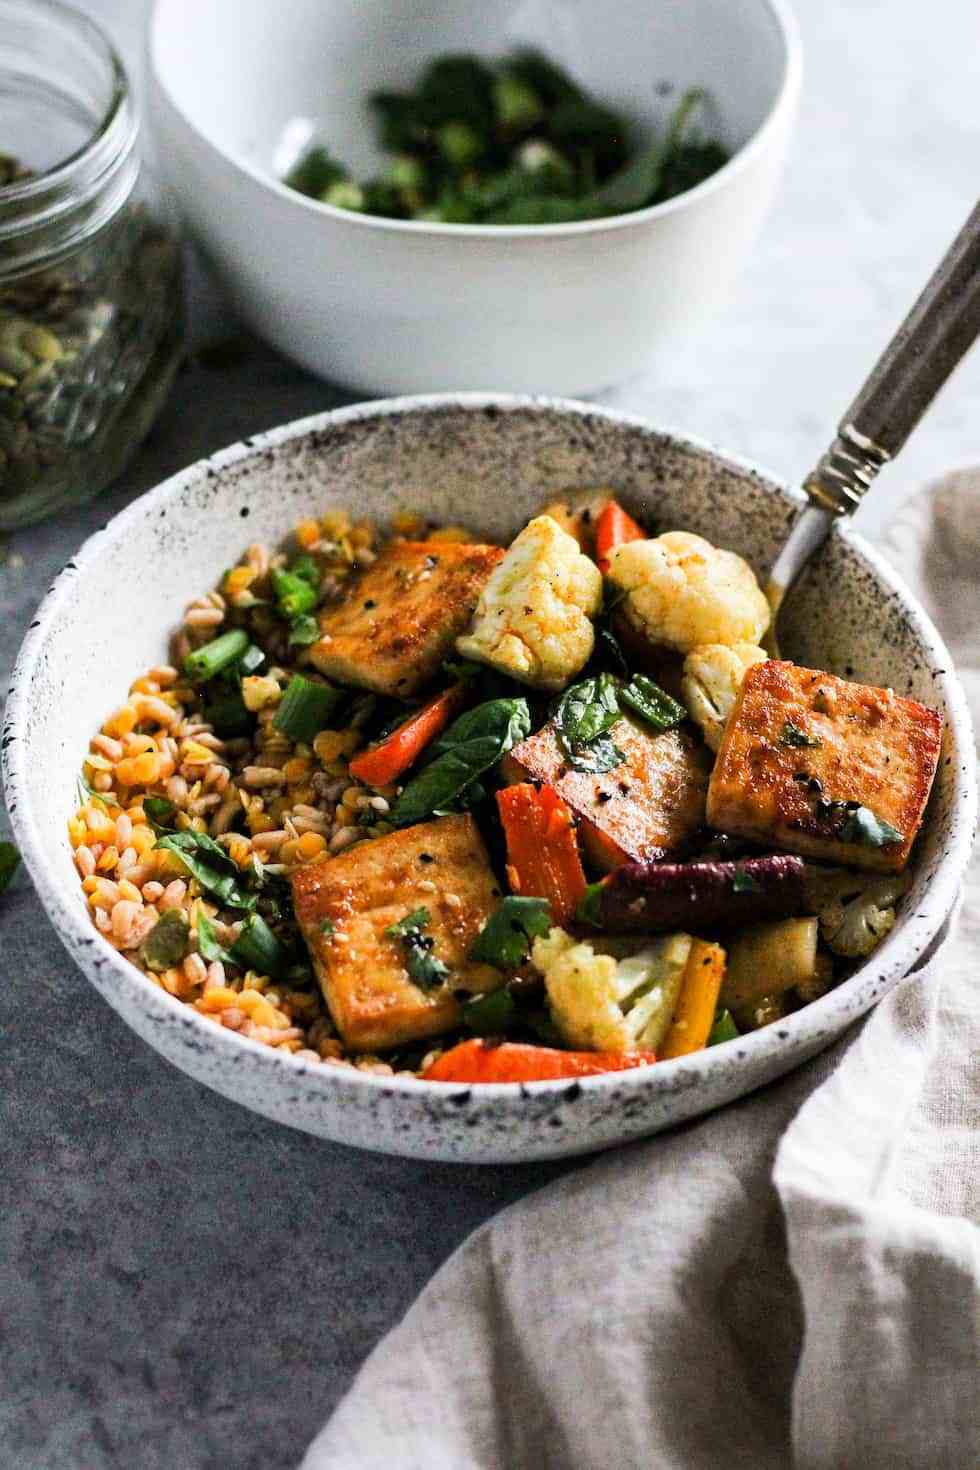 Tofu and veggies in white bowls on grey background.